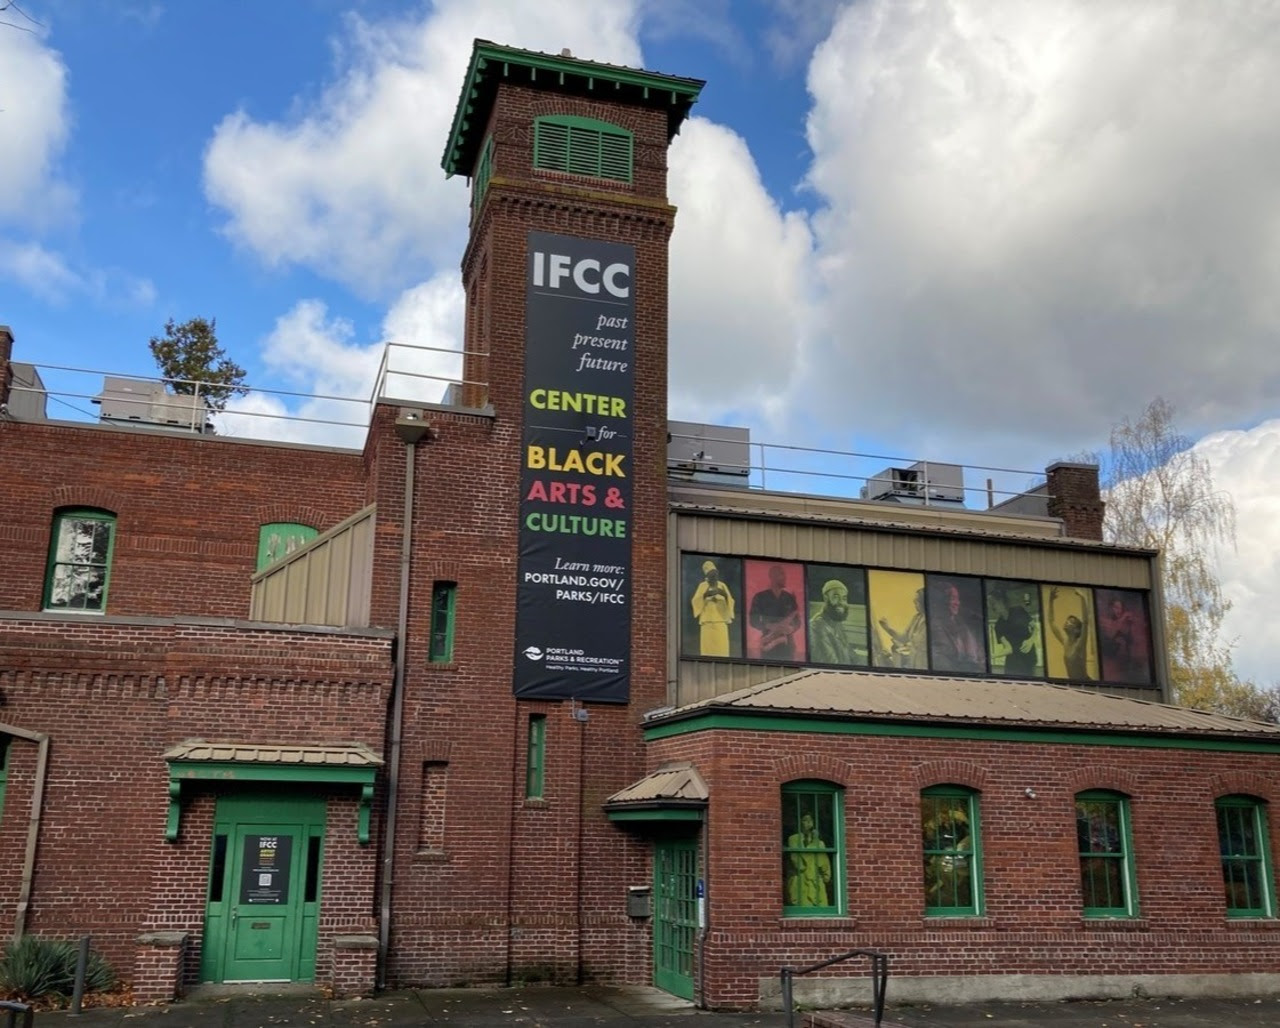 IFCC, a former brick firehouse with green trim and colorful banners showcasing local Black artists. The main banner says IFCC past present future Center for Black Arts & Culture